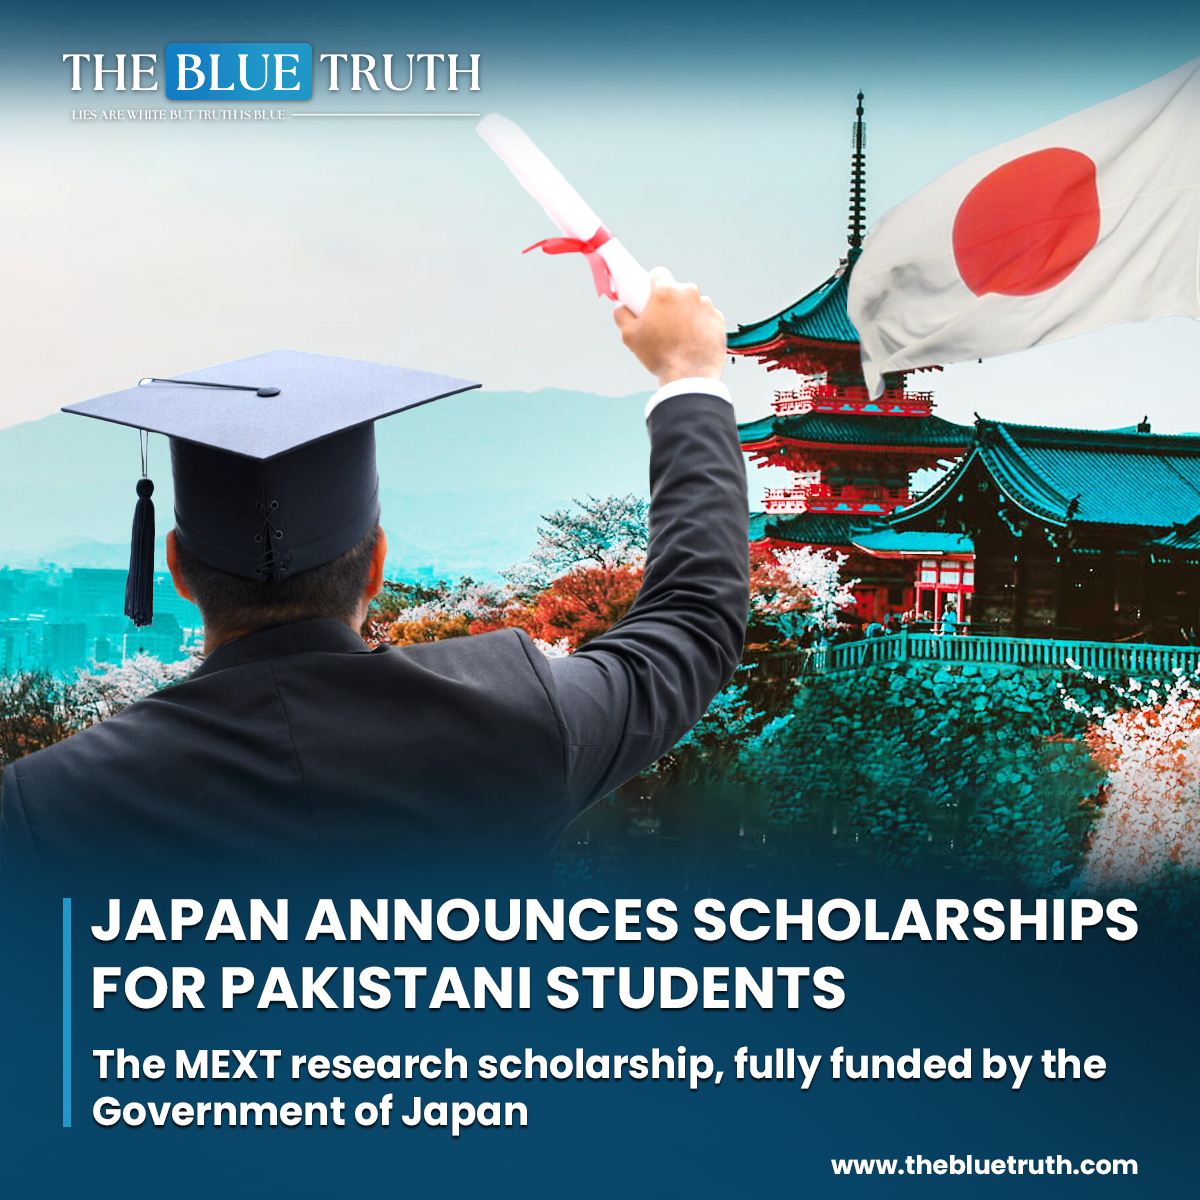 The Japan Embassy is currently receiving applications for the MEXT undergraduate and Research Scholarships (Masters, PhD) 2025.
#JapanScholarships #EducationOpportunities
#StudyAbroad #PakJapanRelations
#StudentExchange #GlobalLearning #OpportunityForStudents #Tbt #thebluetruth